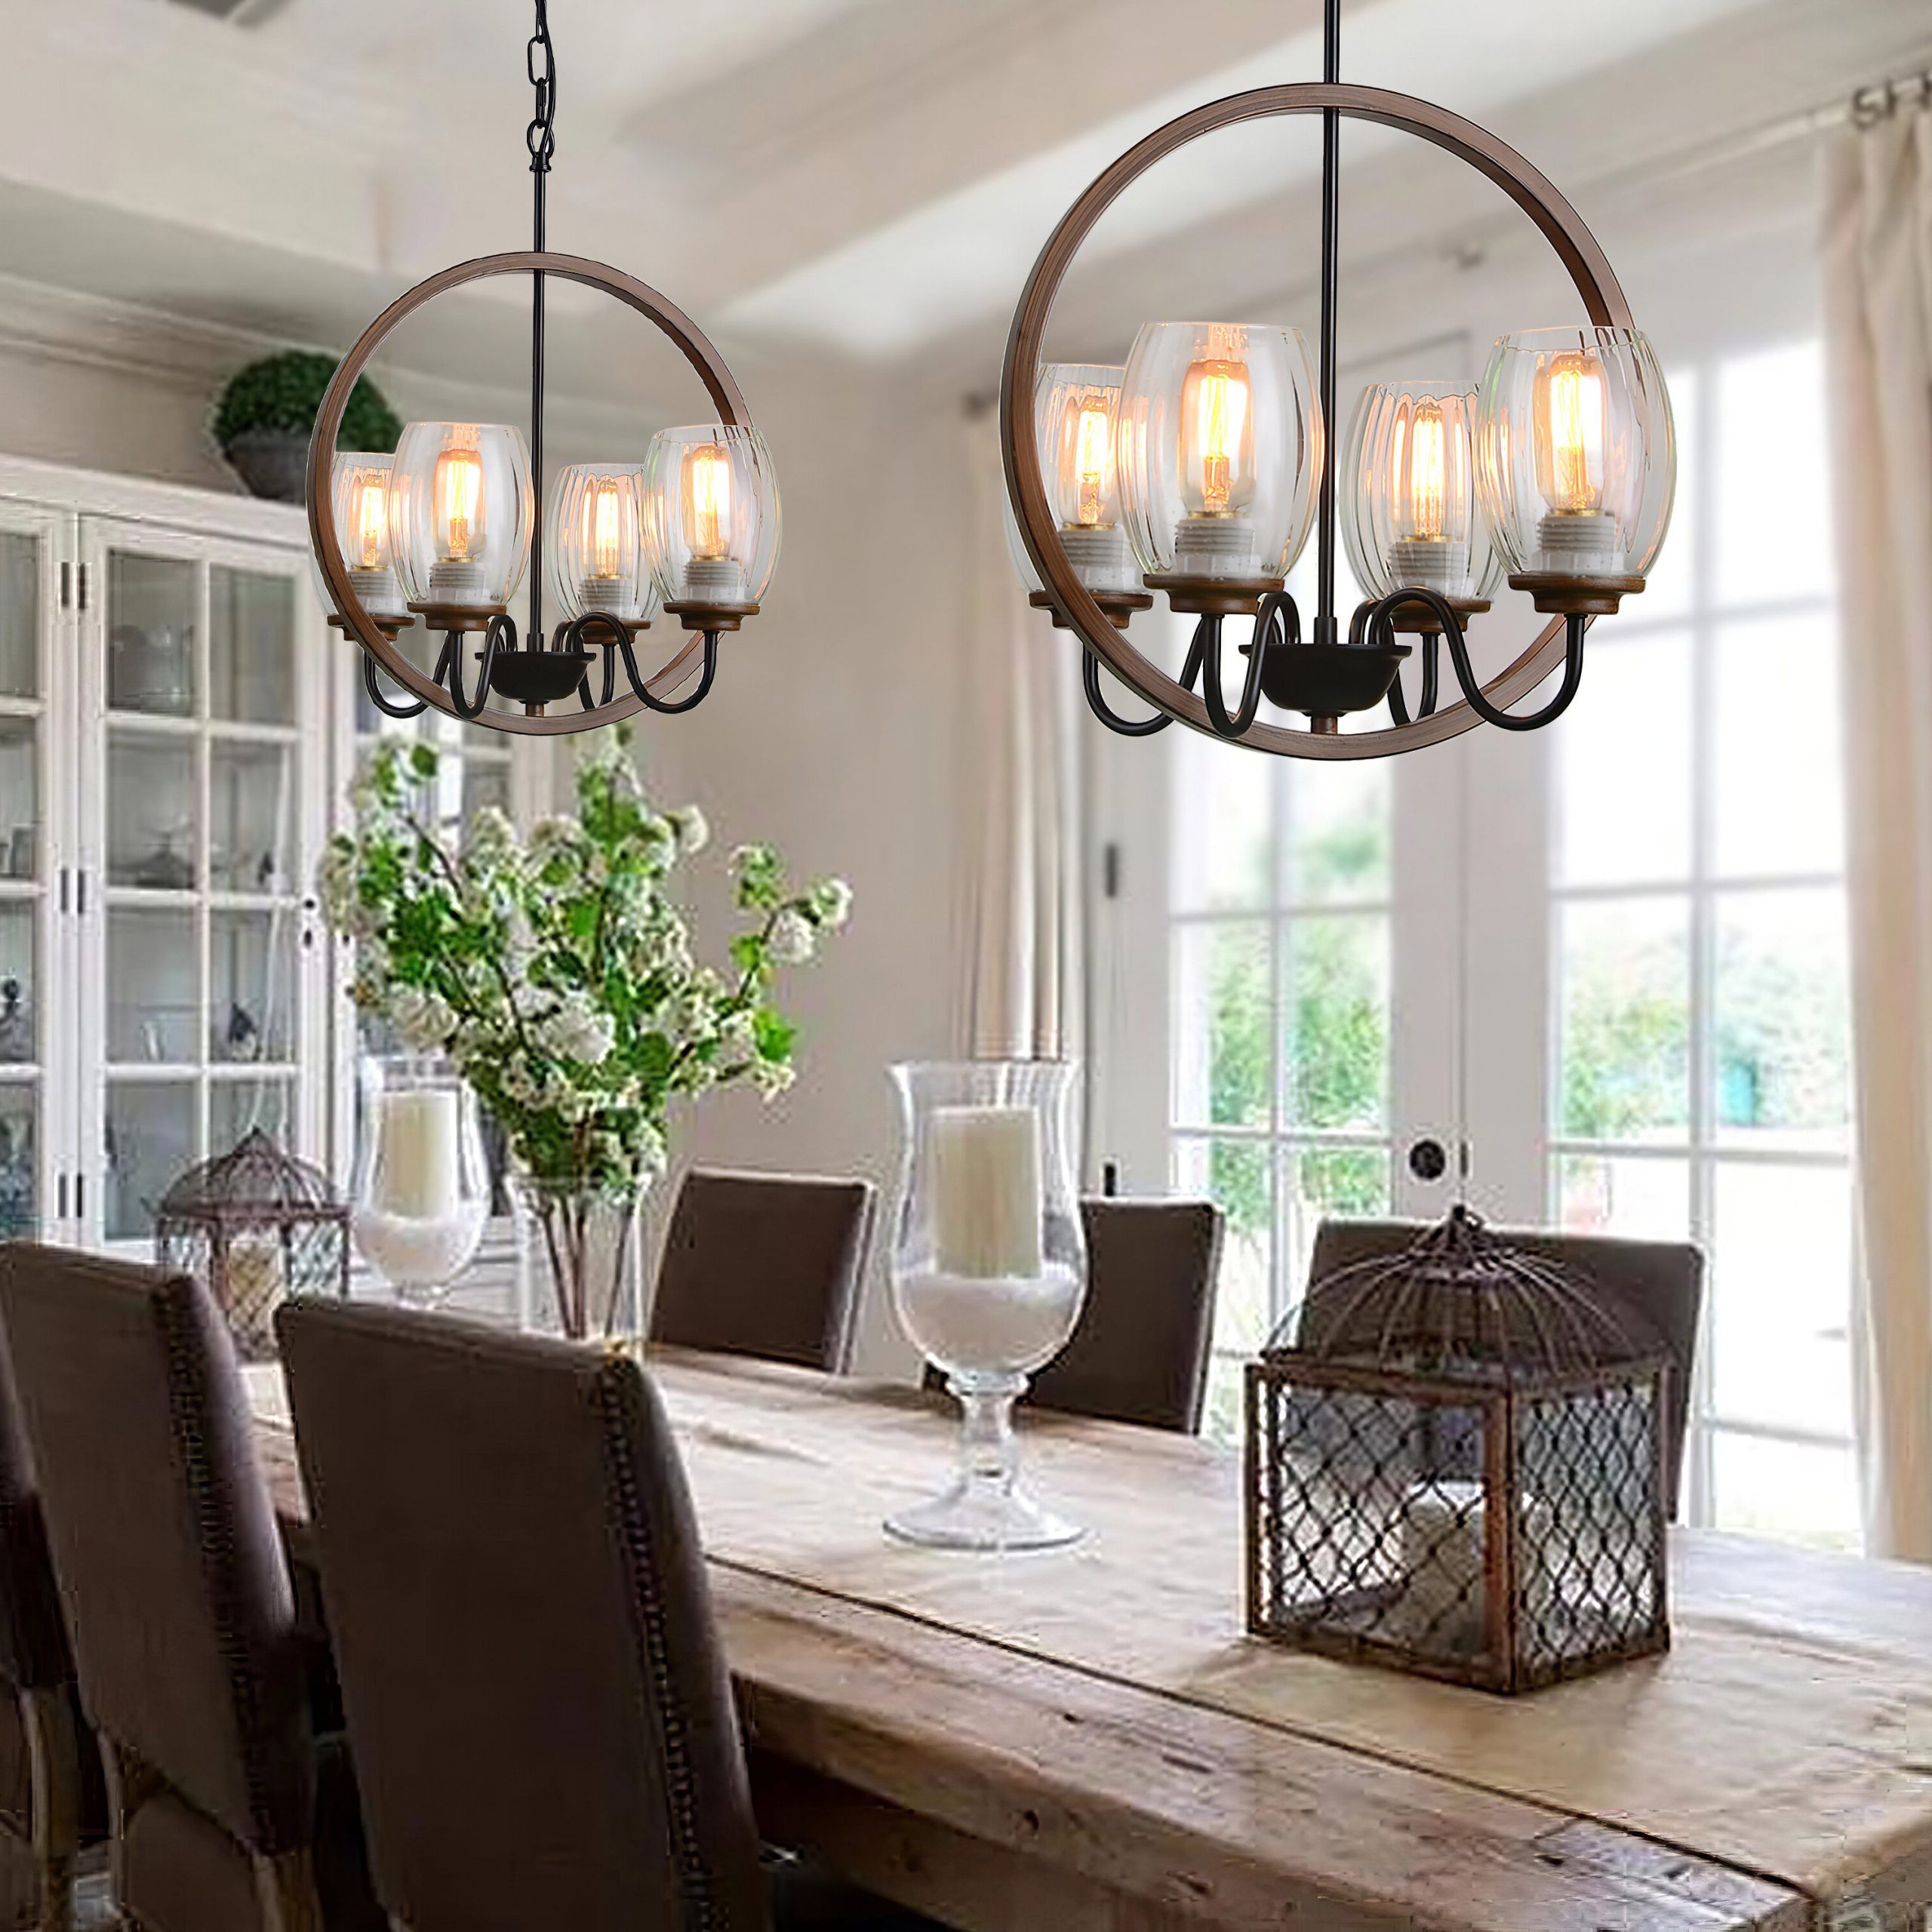 Most Recently Released Breakwater Bay Fairlea Industrial Metal Lantern Chandelier Island Light Pendant  Lighting Kitchen Island Fixture Elegant Style Hanging Ceiling Light For  Bedroom Dinning Room Loft Foyer With 4 Glass Shades (View 9 of 15)